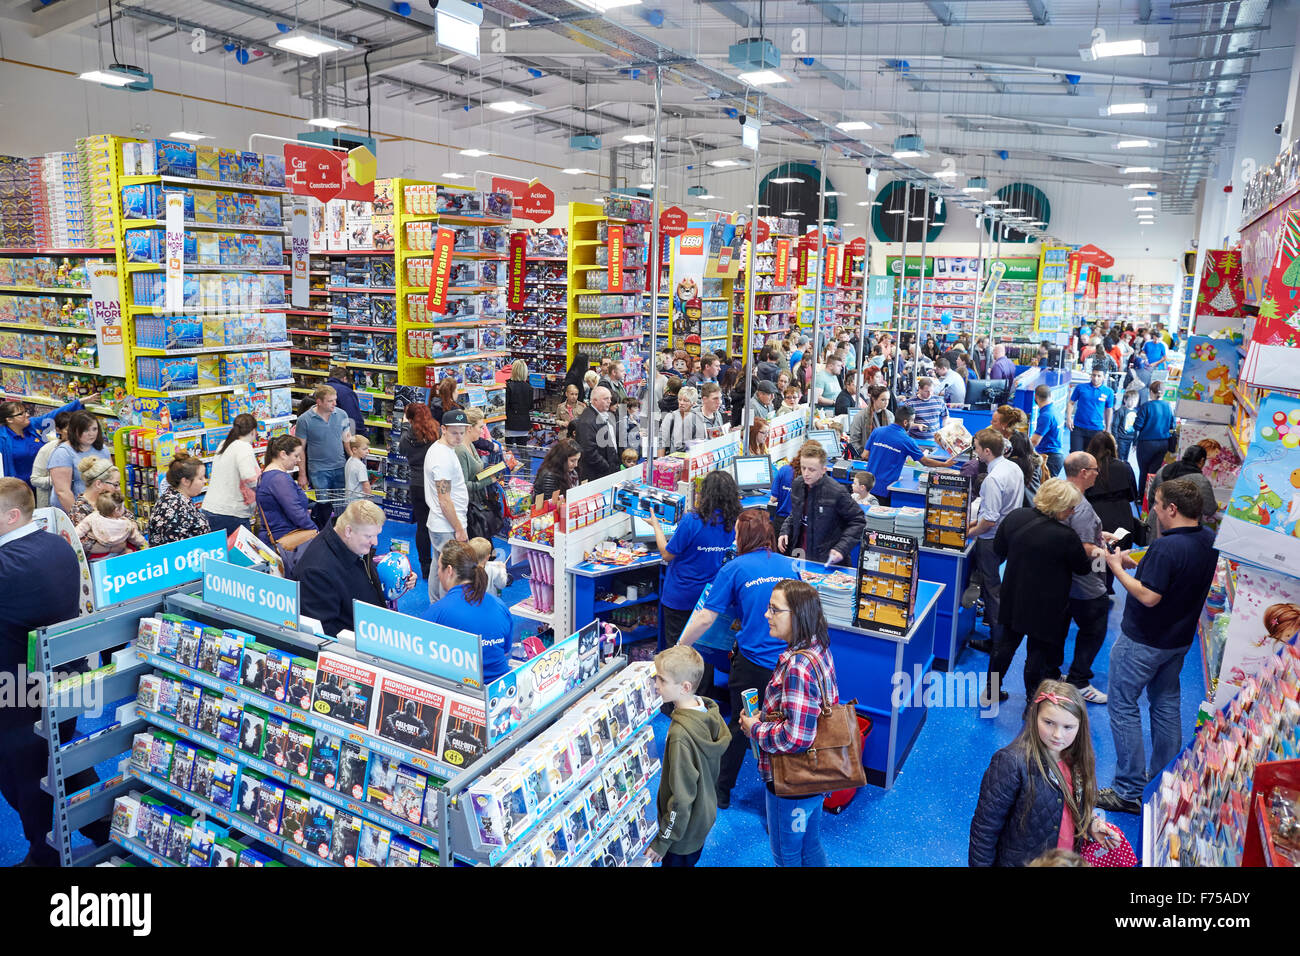 Smyth toy store opens in Blackburn at Hyndburn Peel Centre   interior vide view crazy busy manic  Shops shopping shopper store r Stock Photo